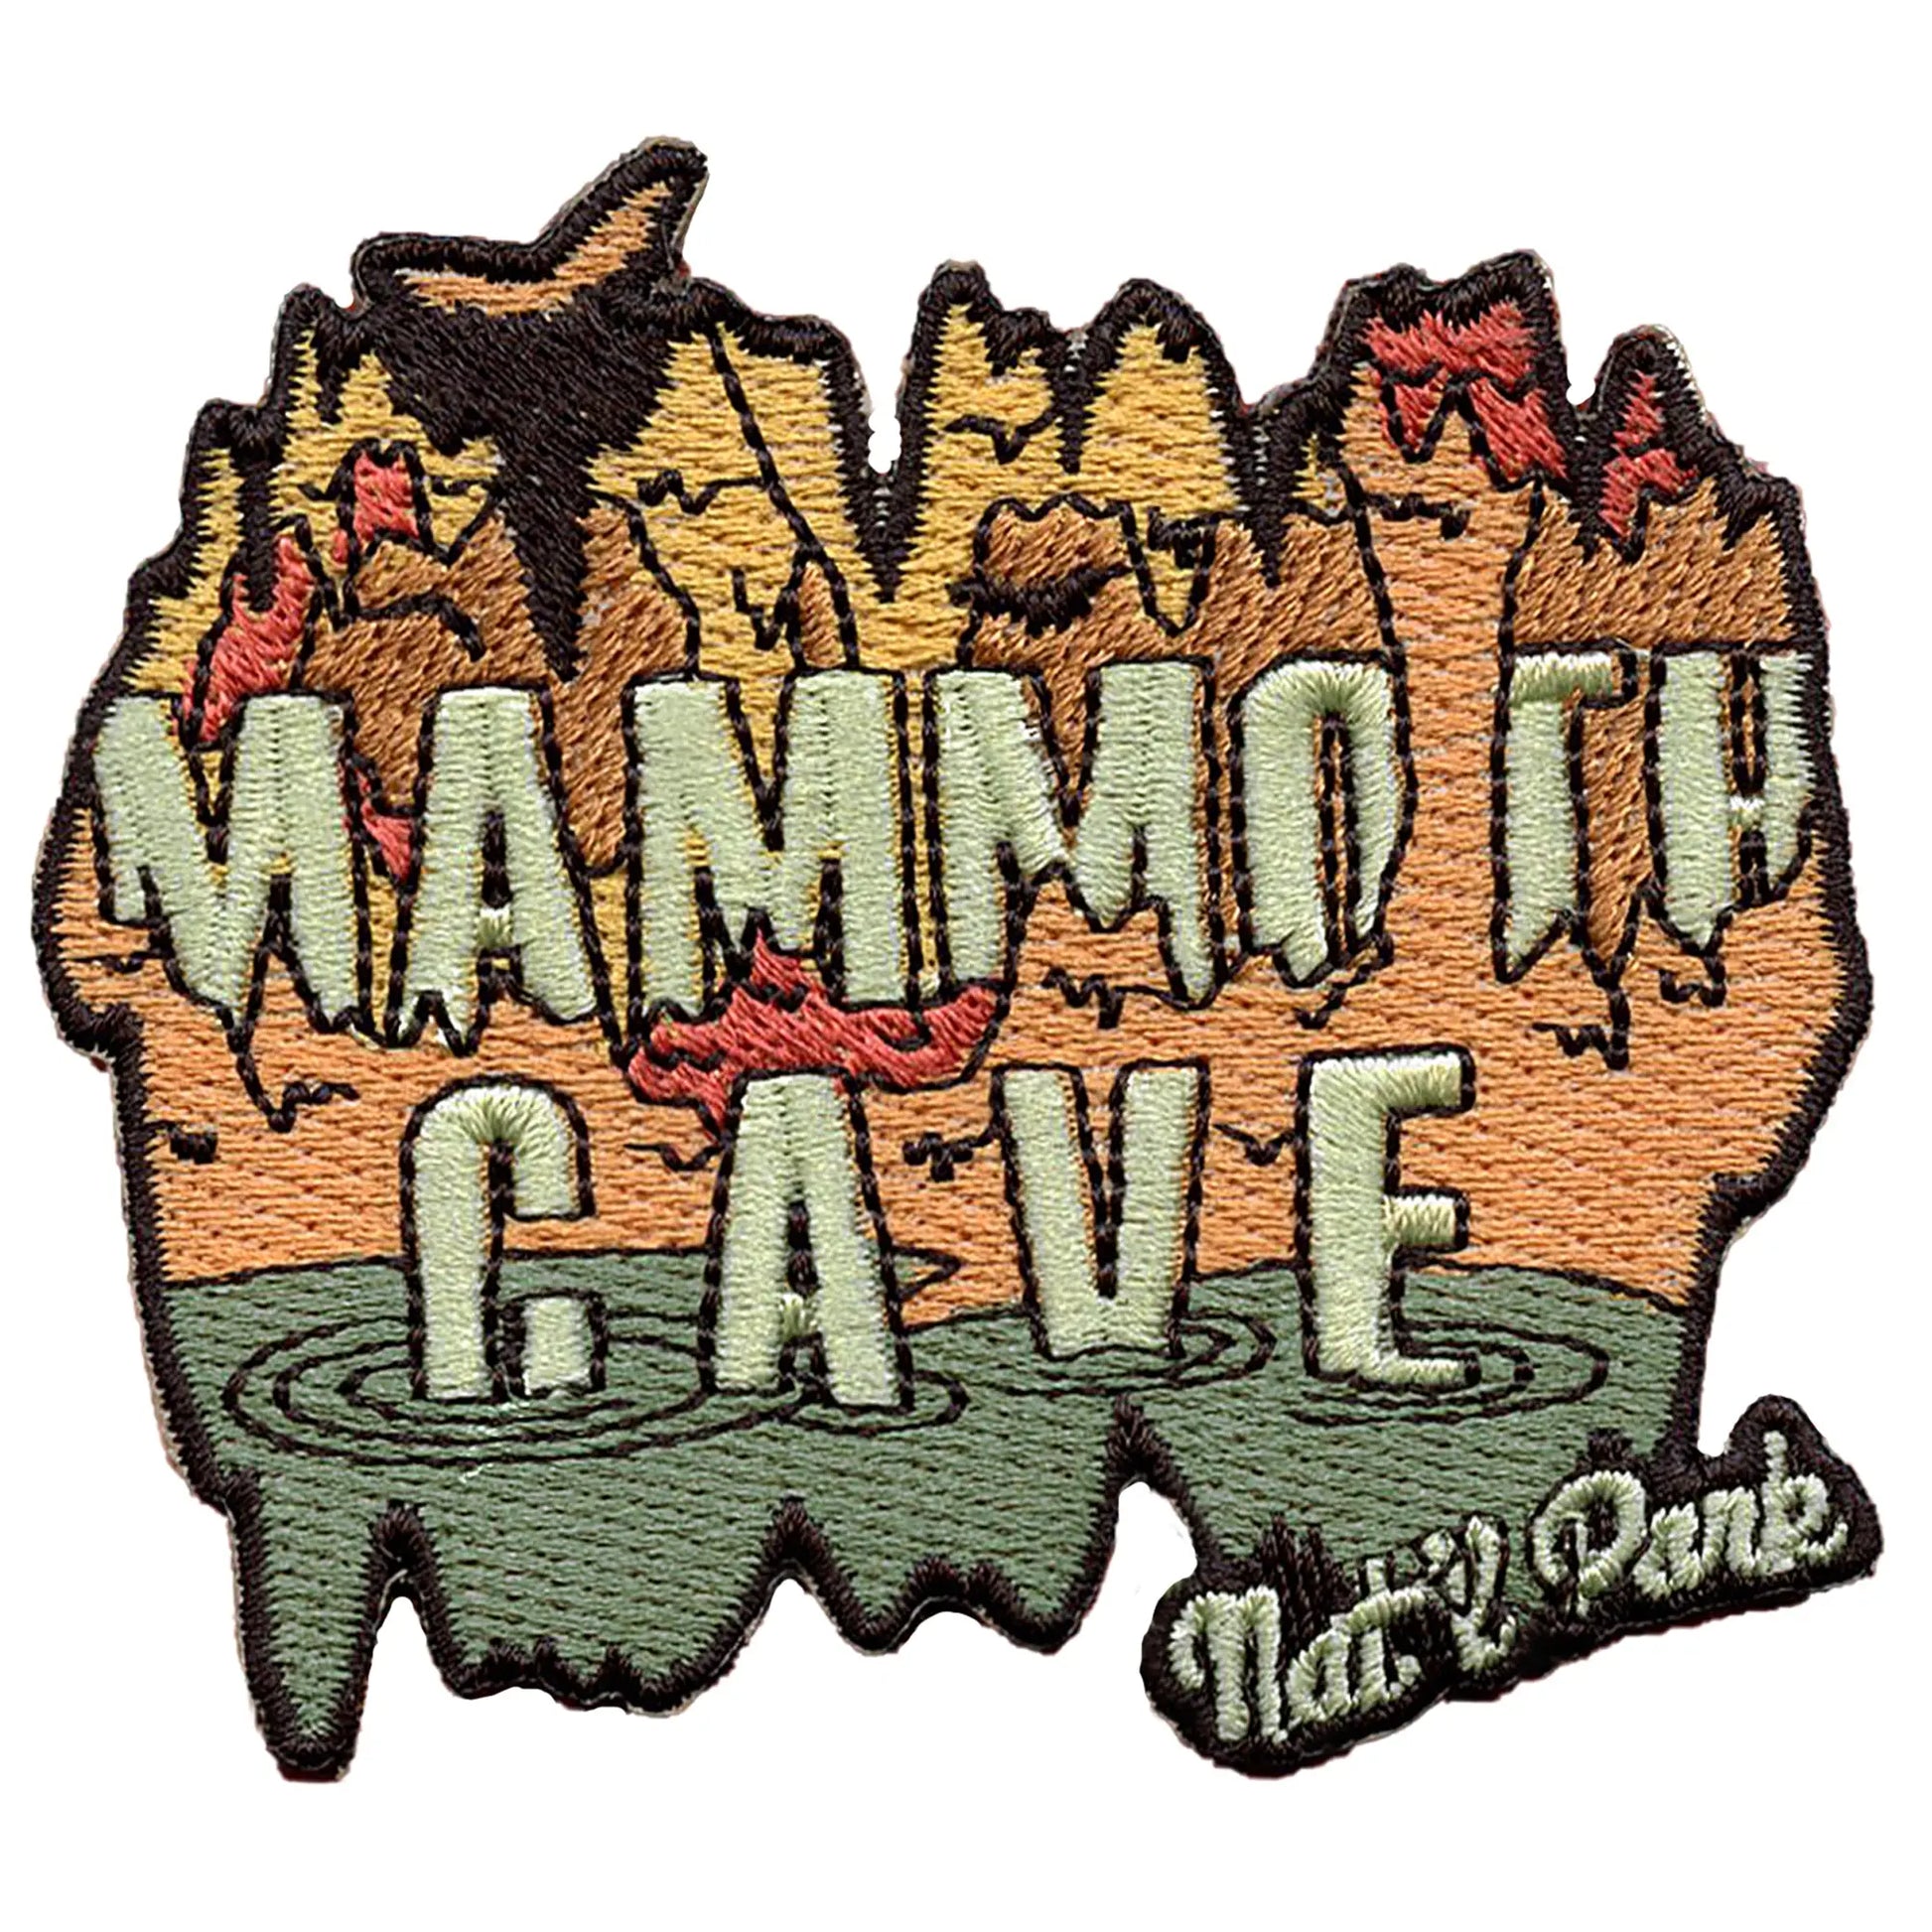 Mammoth Cave Cut Out Patch National Park Kentucky Embroidered Iron On